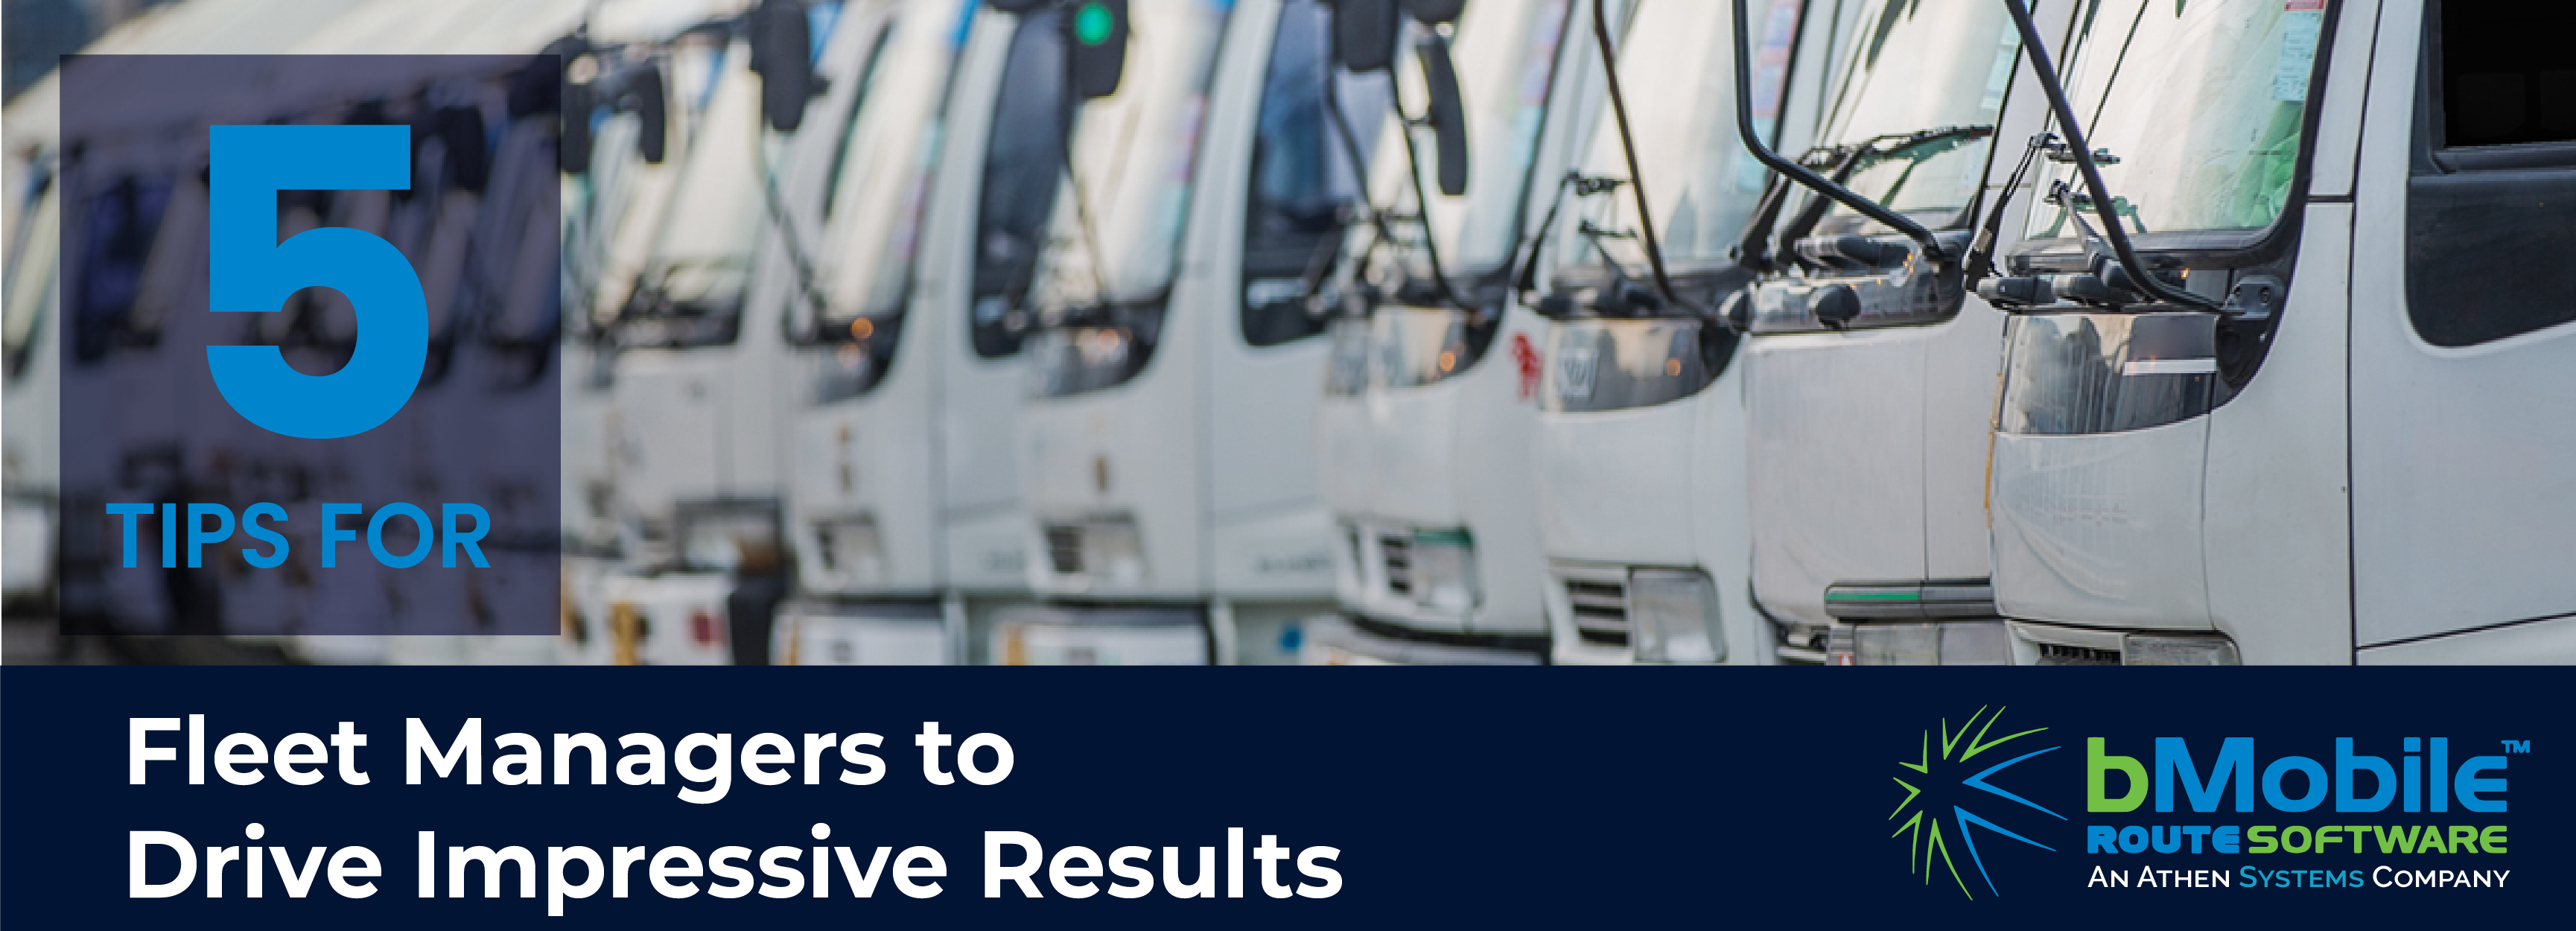 5 Tips for Fleet Managers to Drive Impressive Results